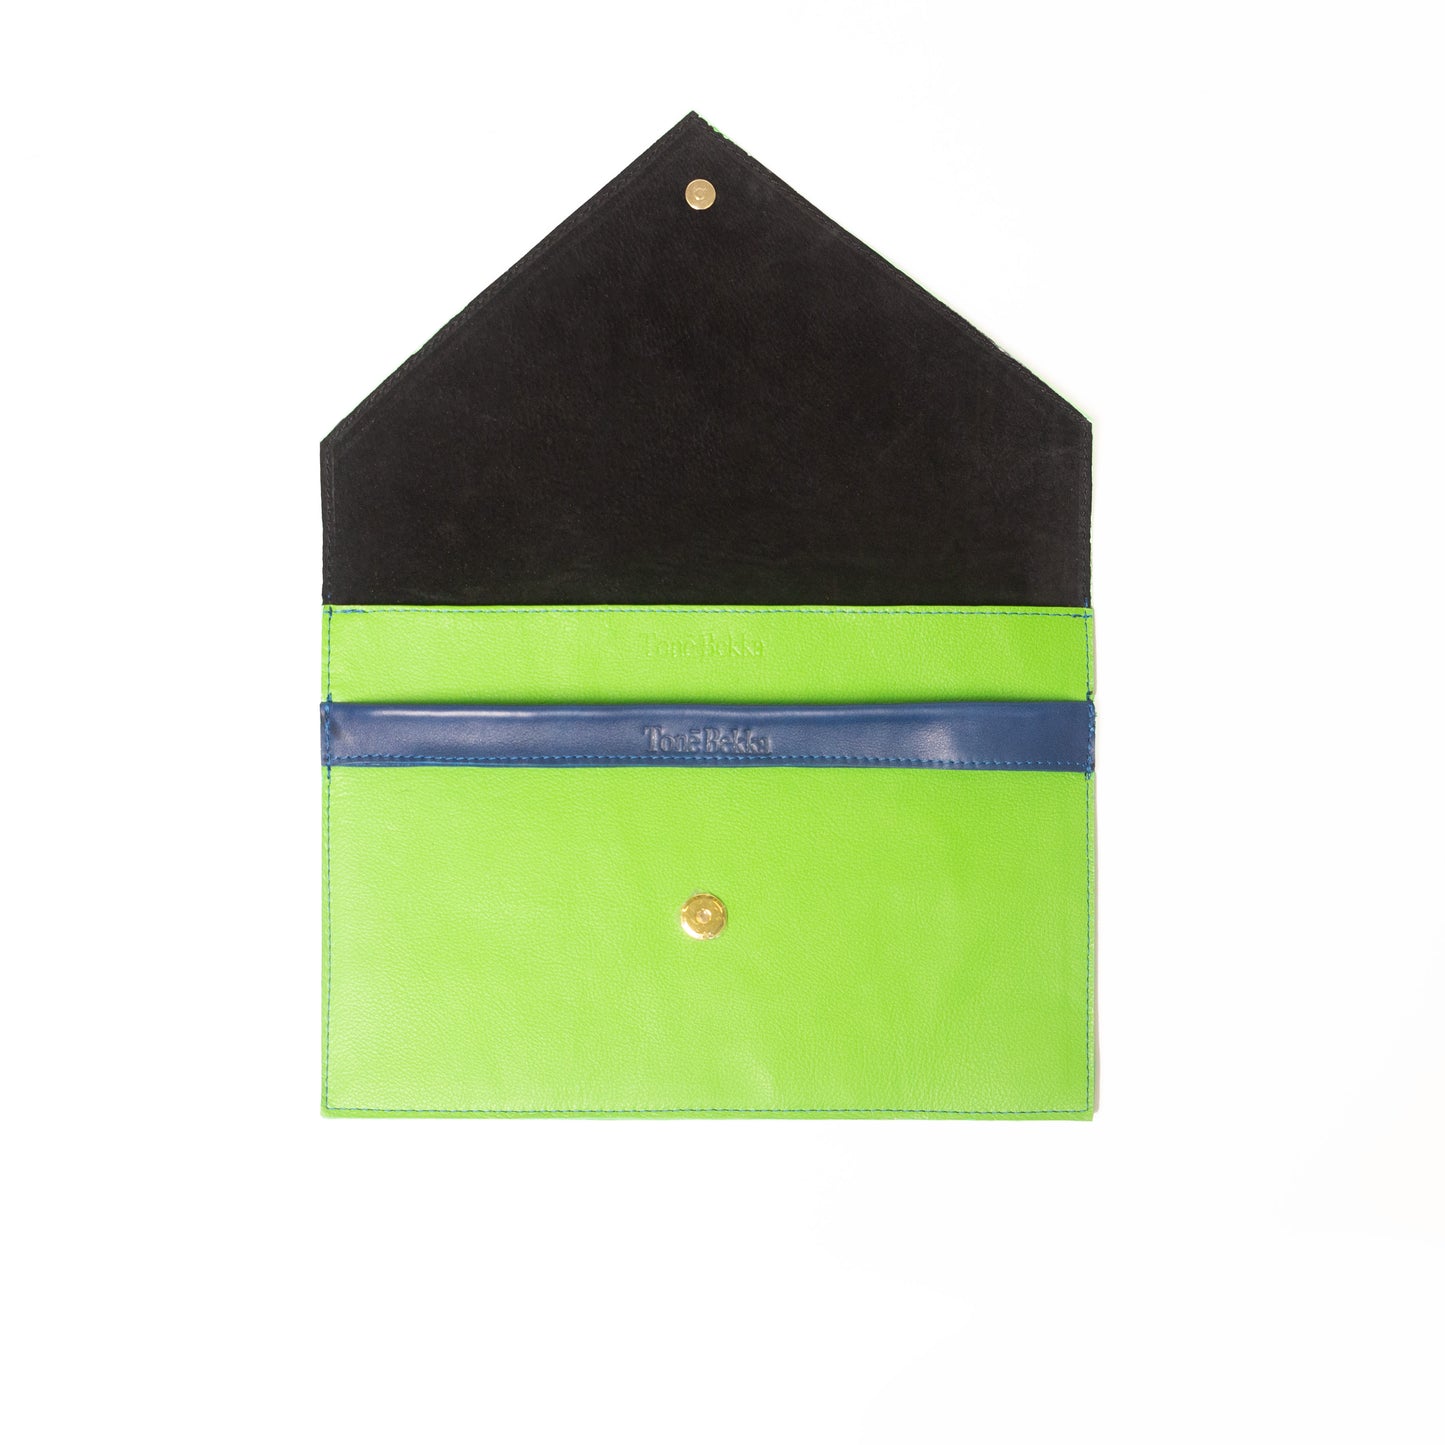 Renee Green & Blue Leather Foldover Clutch